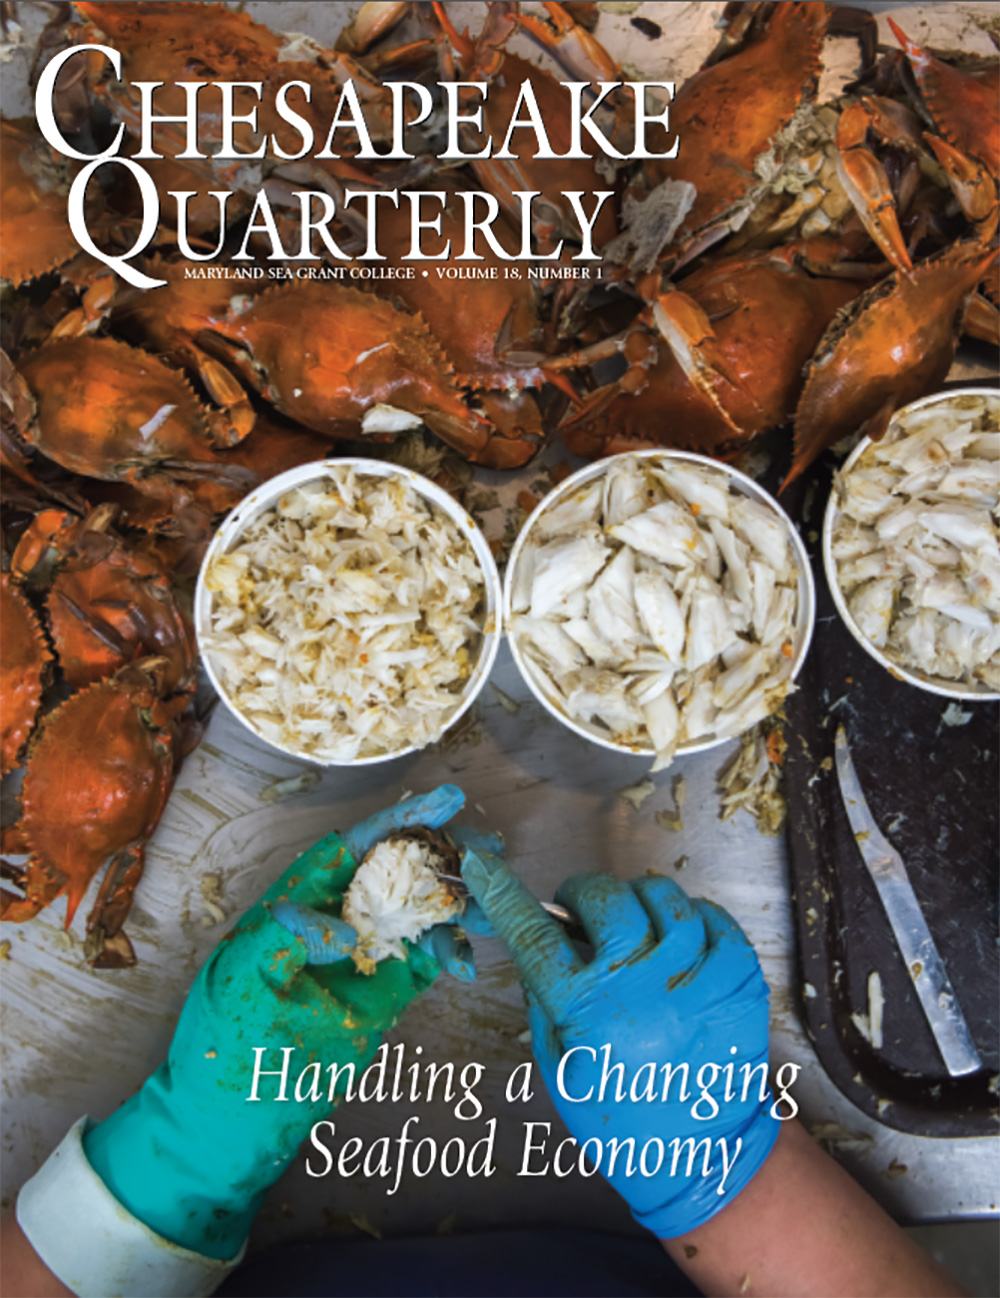 Volume 18, Number 1 : Handling a Changing Seafood Economy